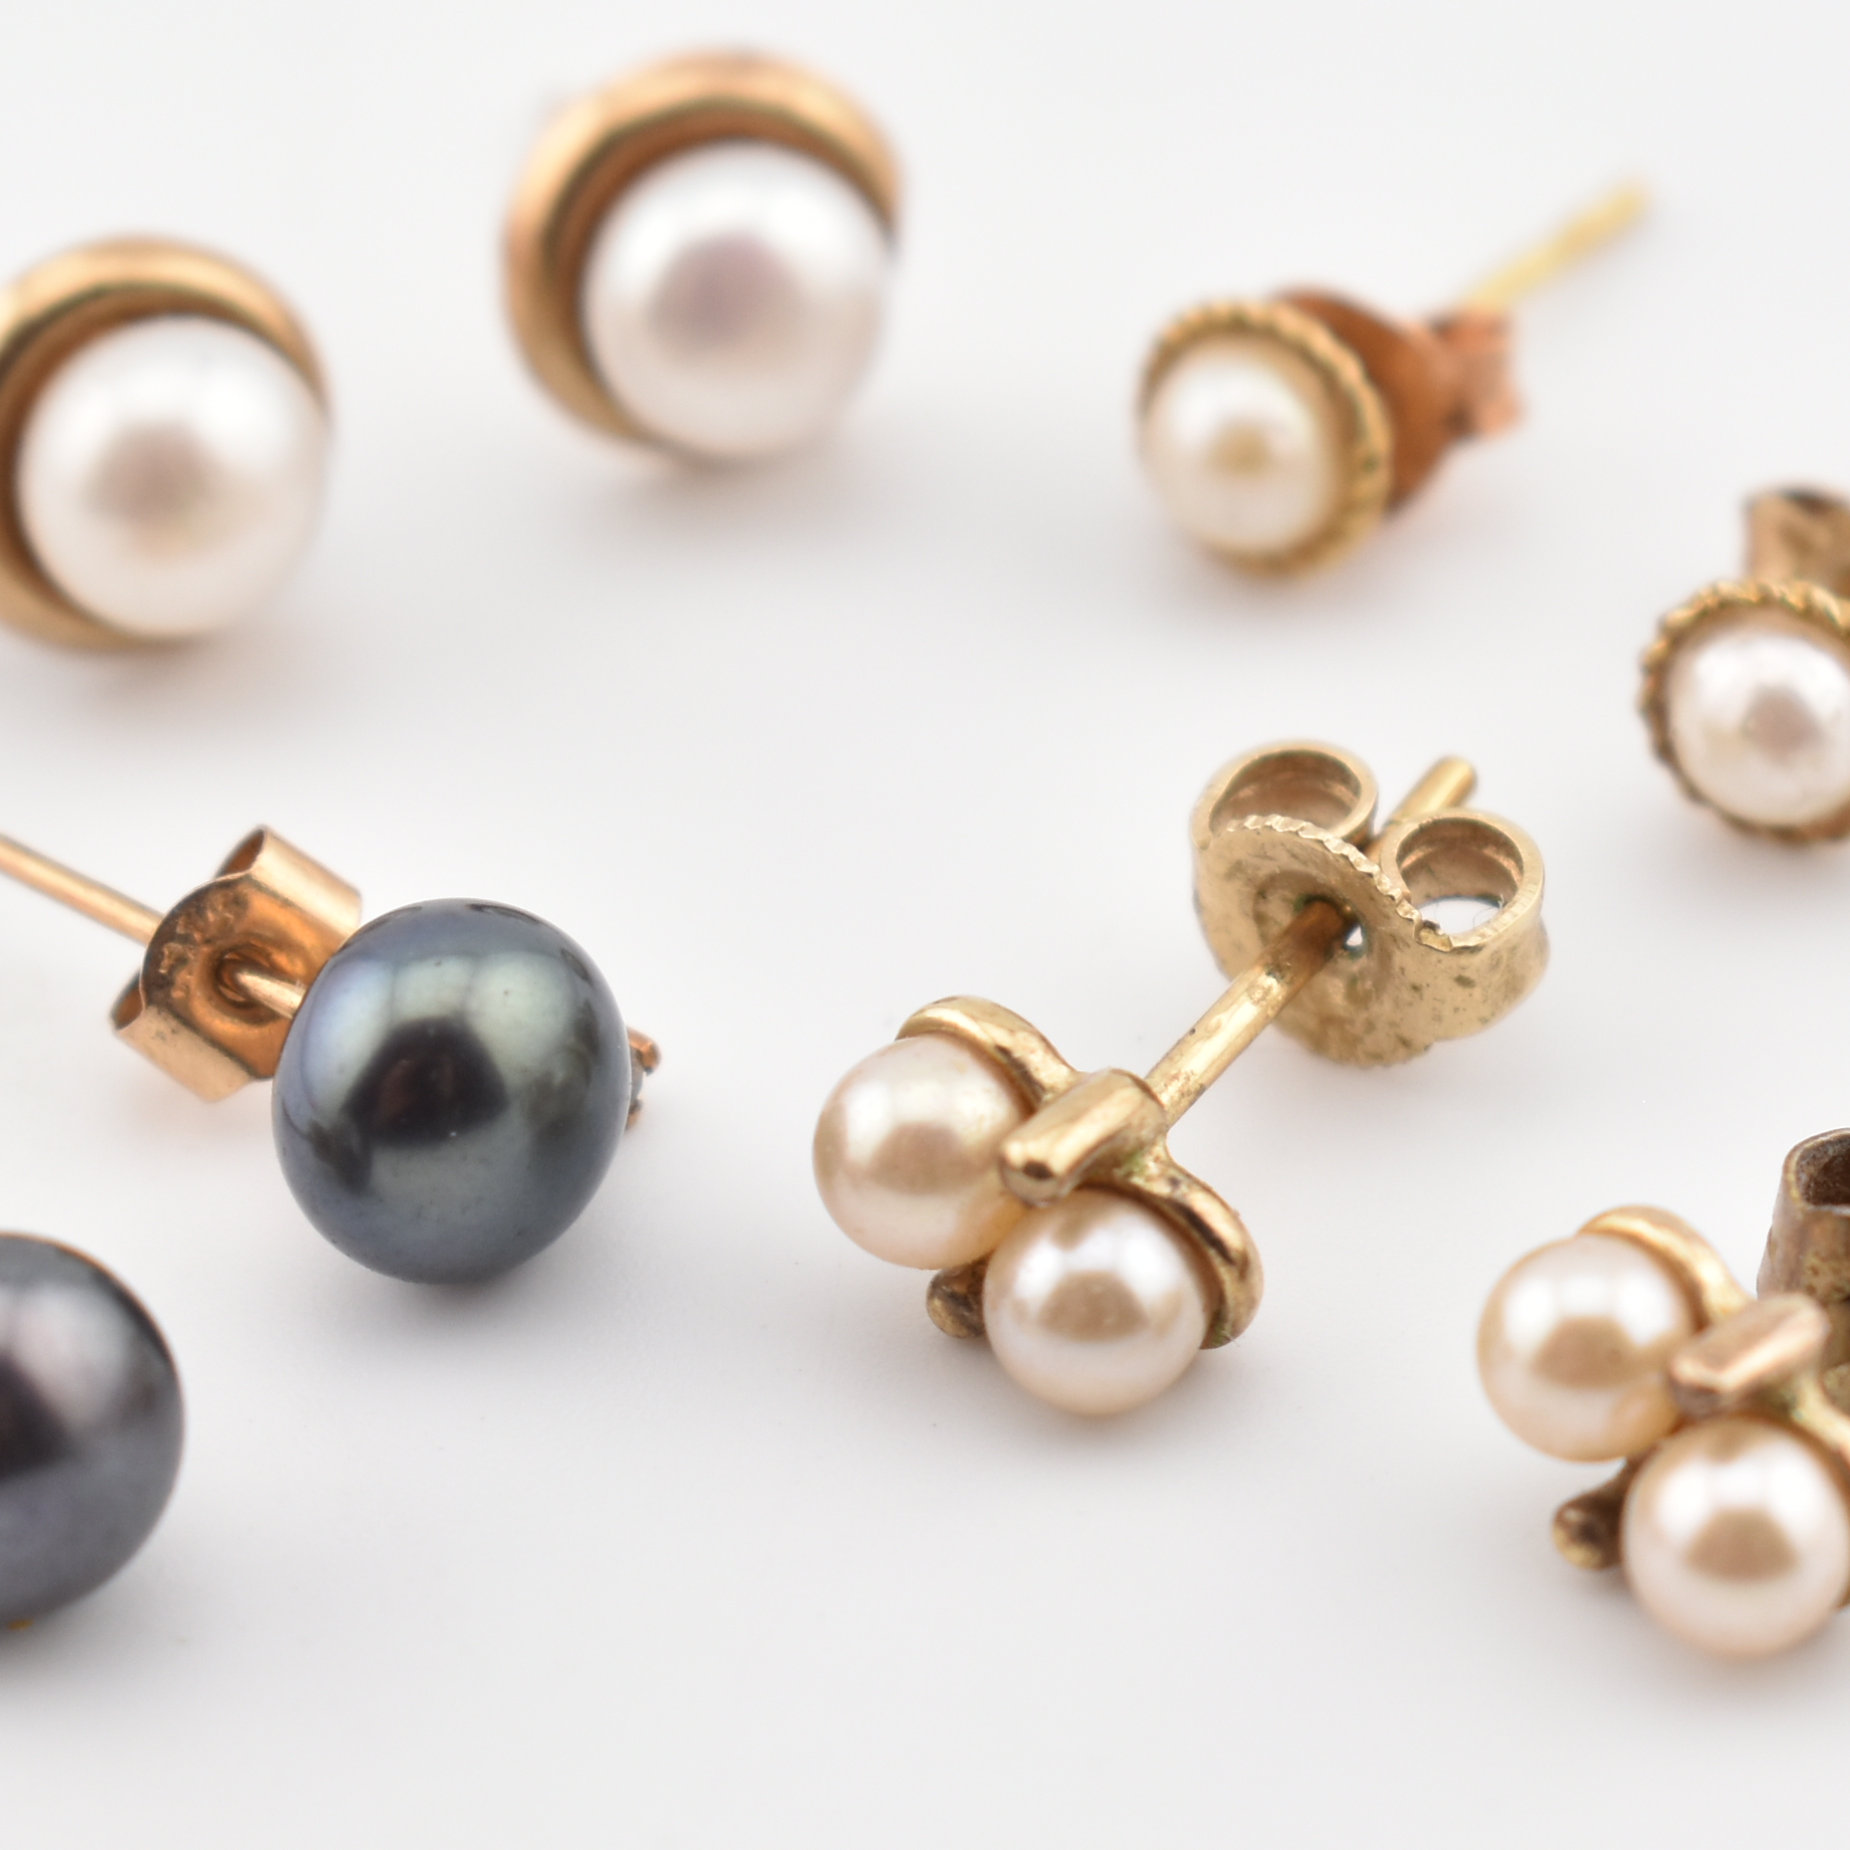 FOUR PAIRS OF 9CT GOLD & SILVER CULTURED PEARL STUD EARRINGS - Image 3 of 4